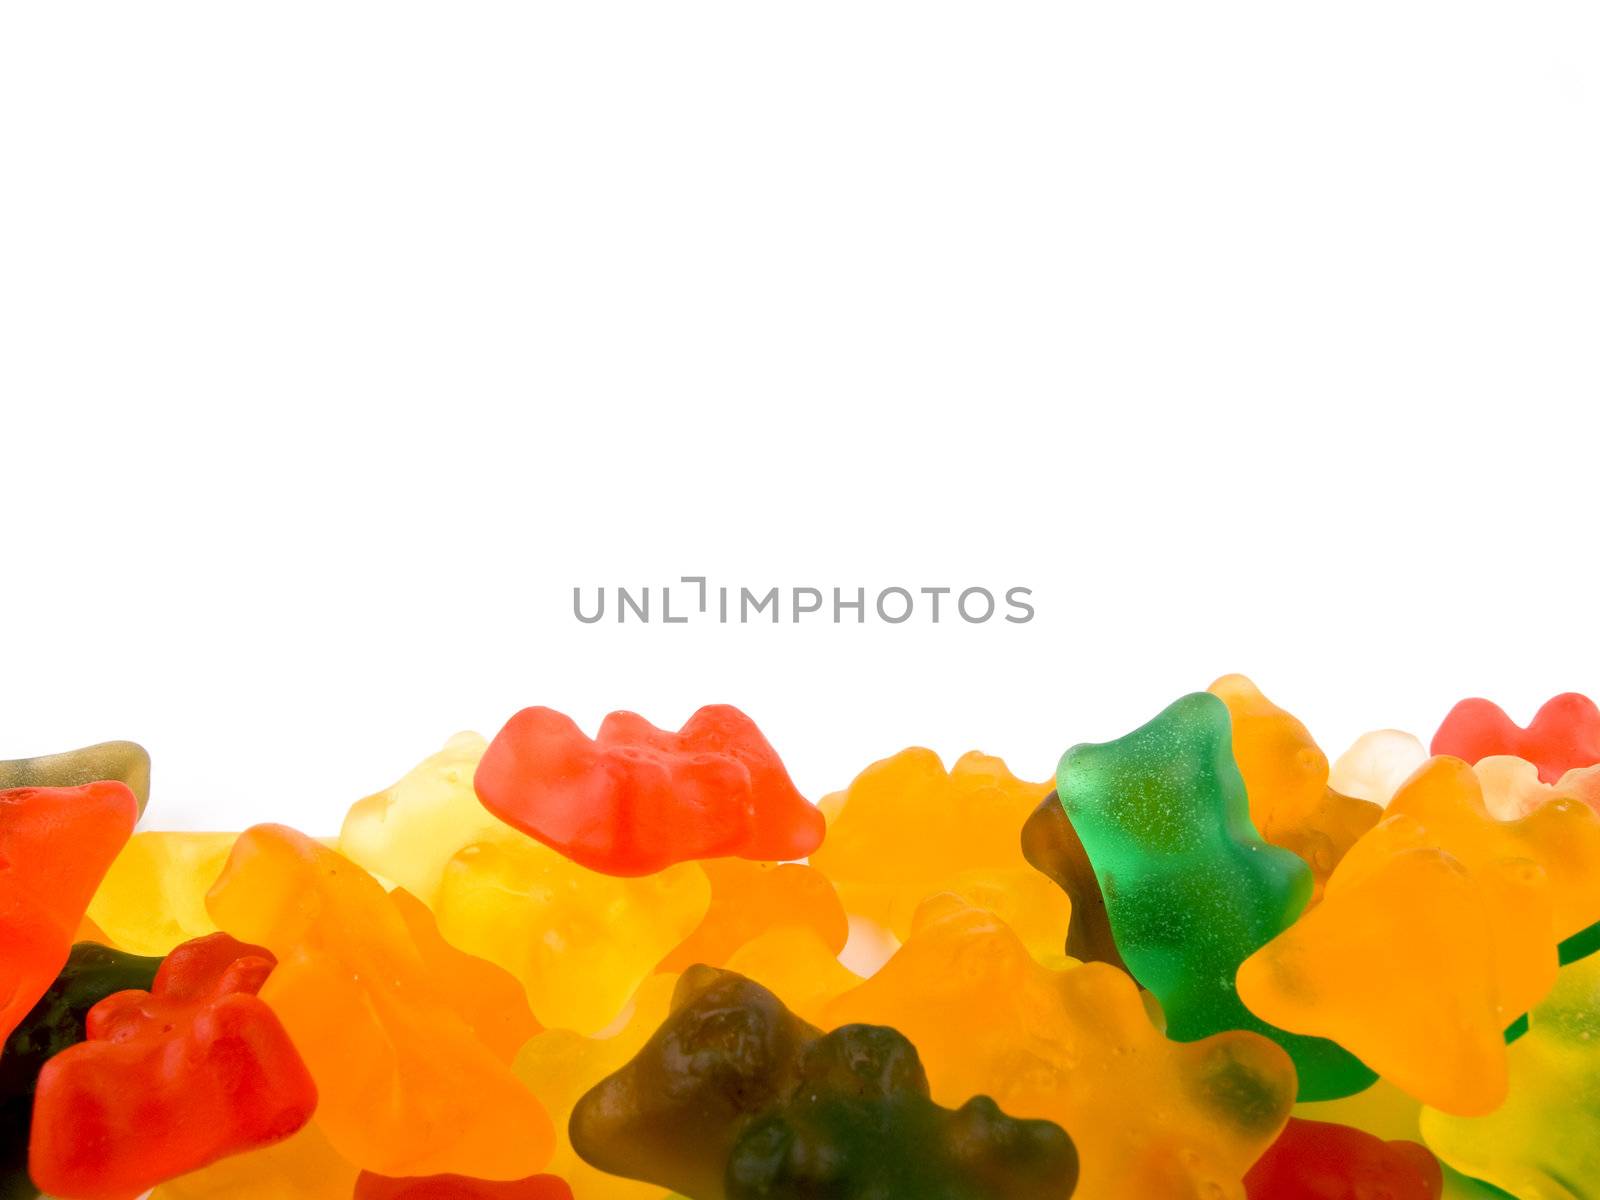 Lots of gummy bears on white background.